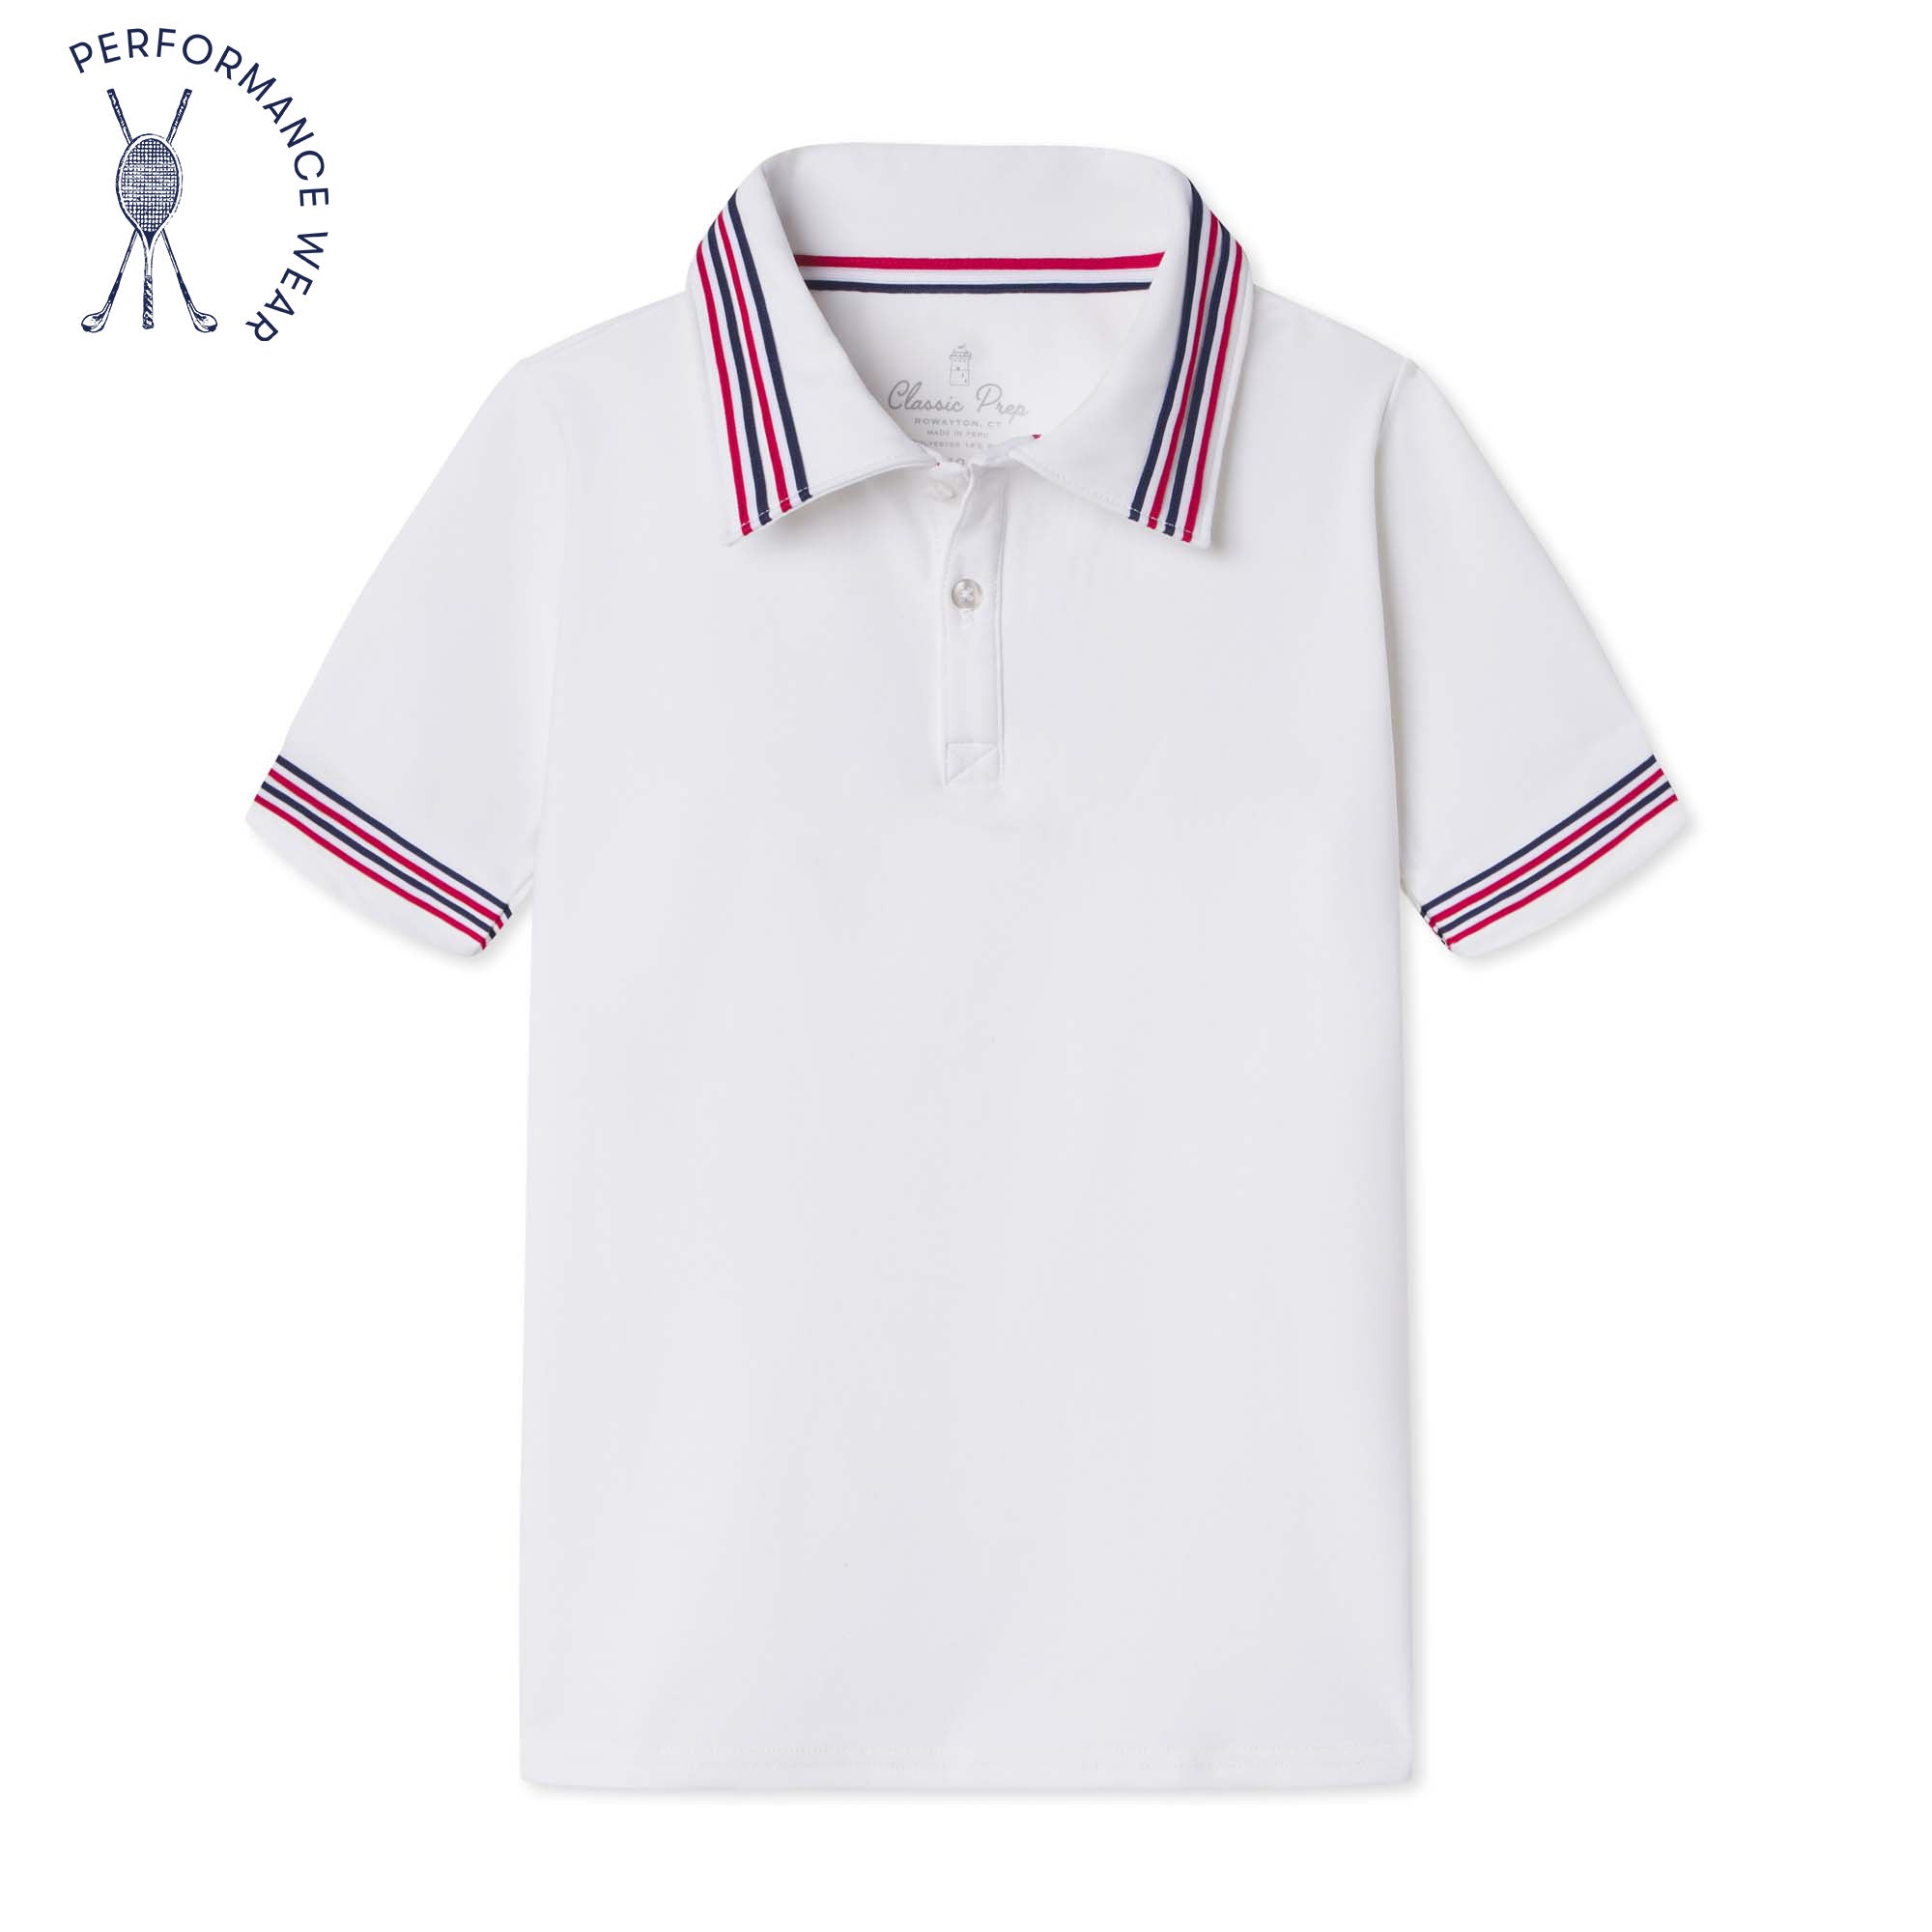 Terence Tennis Performance Americana Polo, Bright White